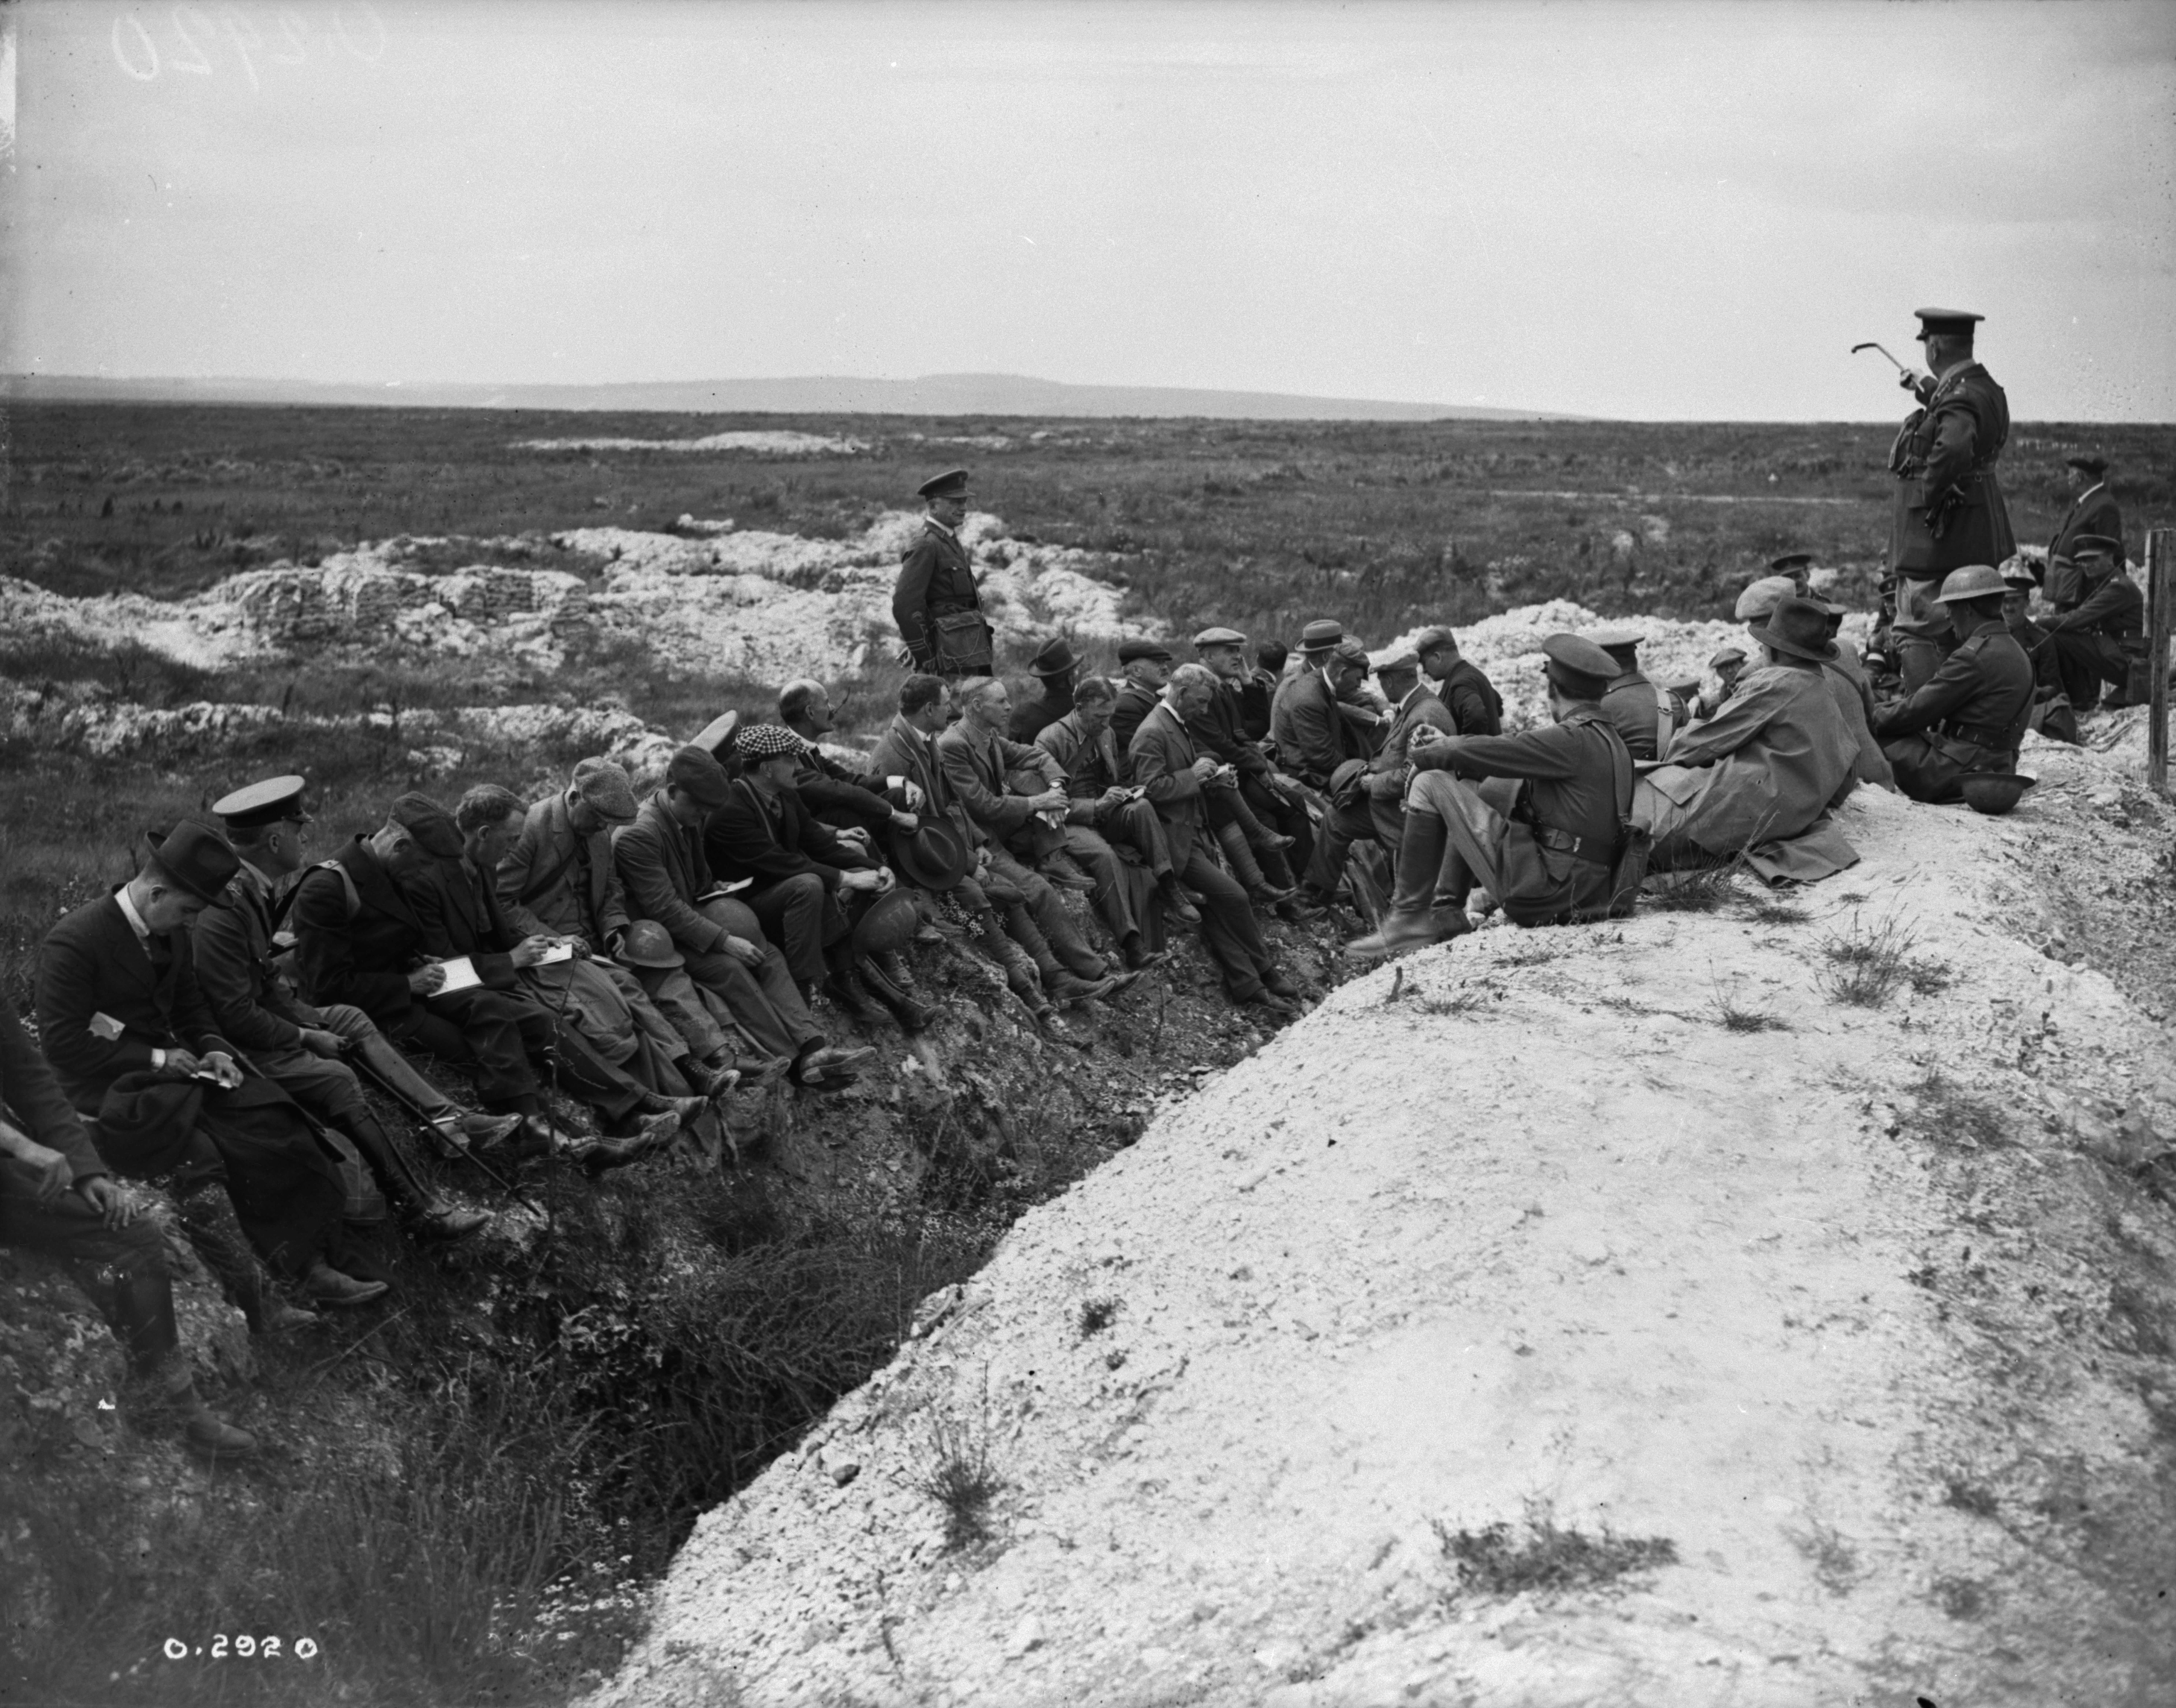 Black and white photograph. A trench in a bare field. Currie, with a riding crop in hand, stands and motions. Approximately two dozen men sit on the trench edge beside him and across from him, faces turned upward listening to what he is saying.